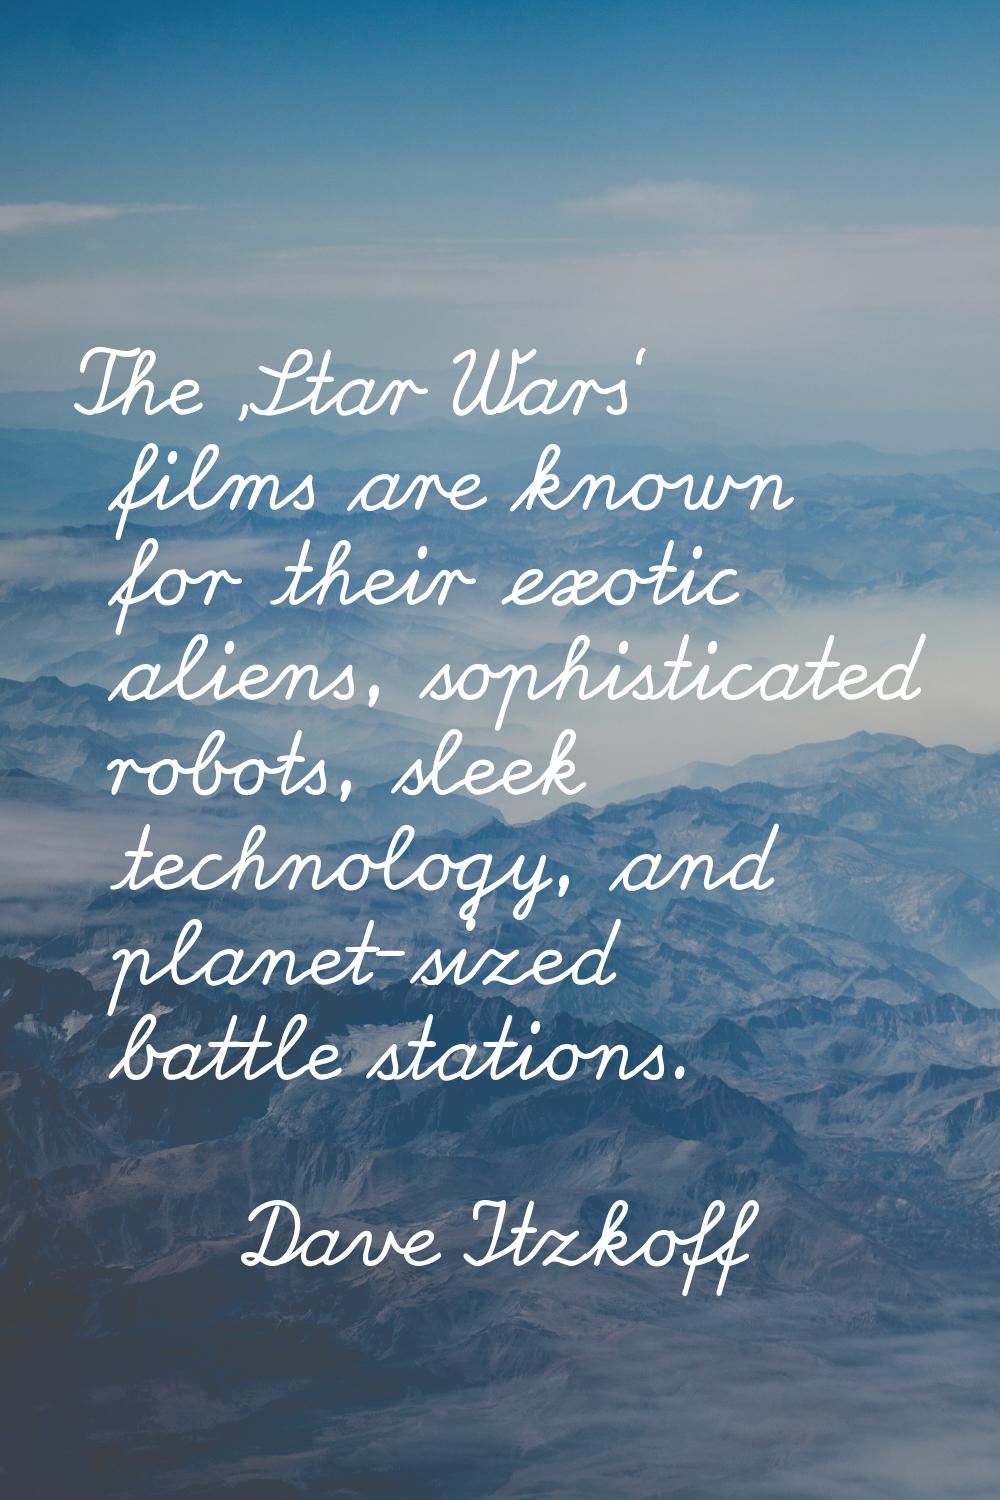 The 'Star Wars' films are known for their exotic aliens, sophisticated robots, sleek technology, an